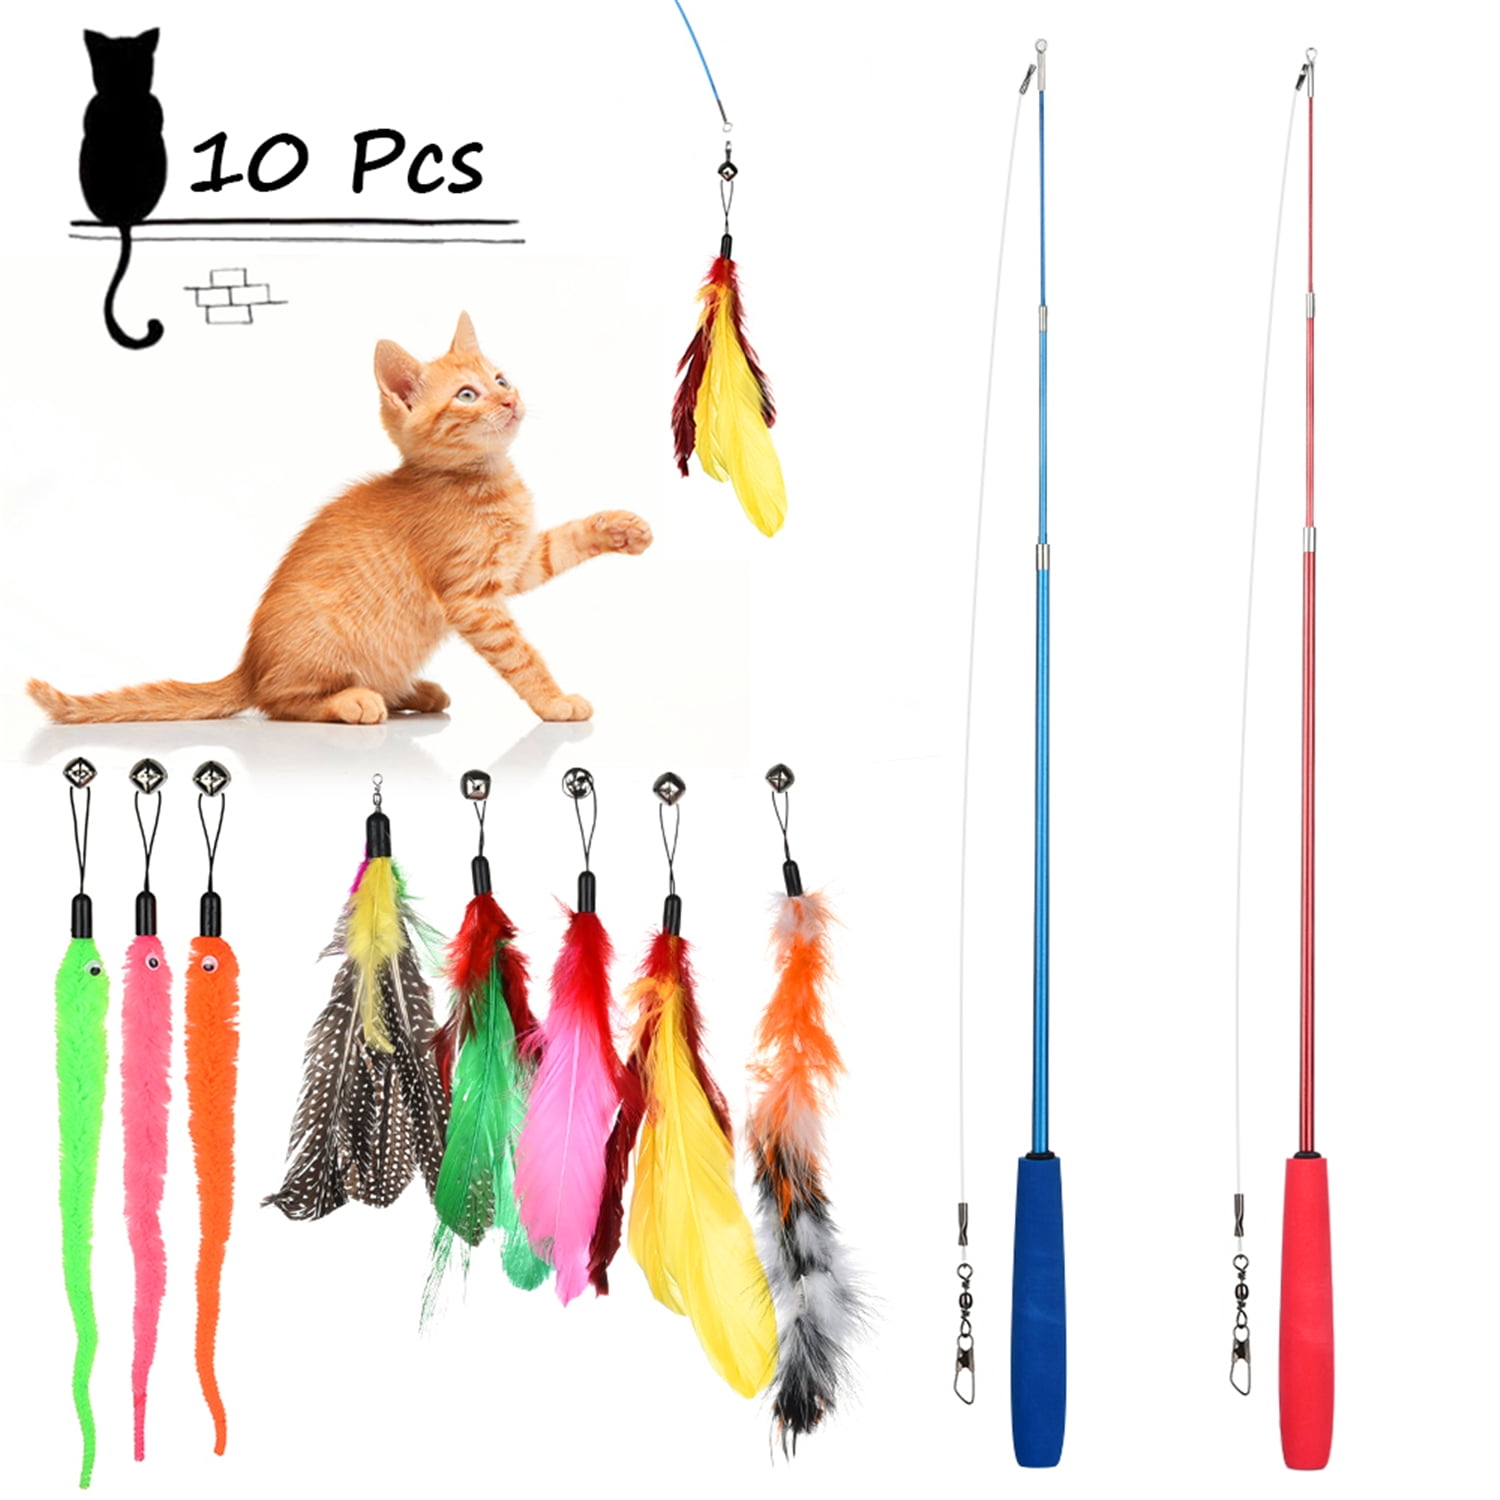 Durable Cat Teaser Toy Wand with Fishing Pole  Flexible Cat Toy Fishing  Pole Catnip, Adjustable Cat Interactive Toys for Kittens Cats Entertainment  Gifts Ronz-au